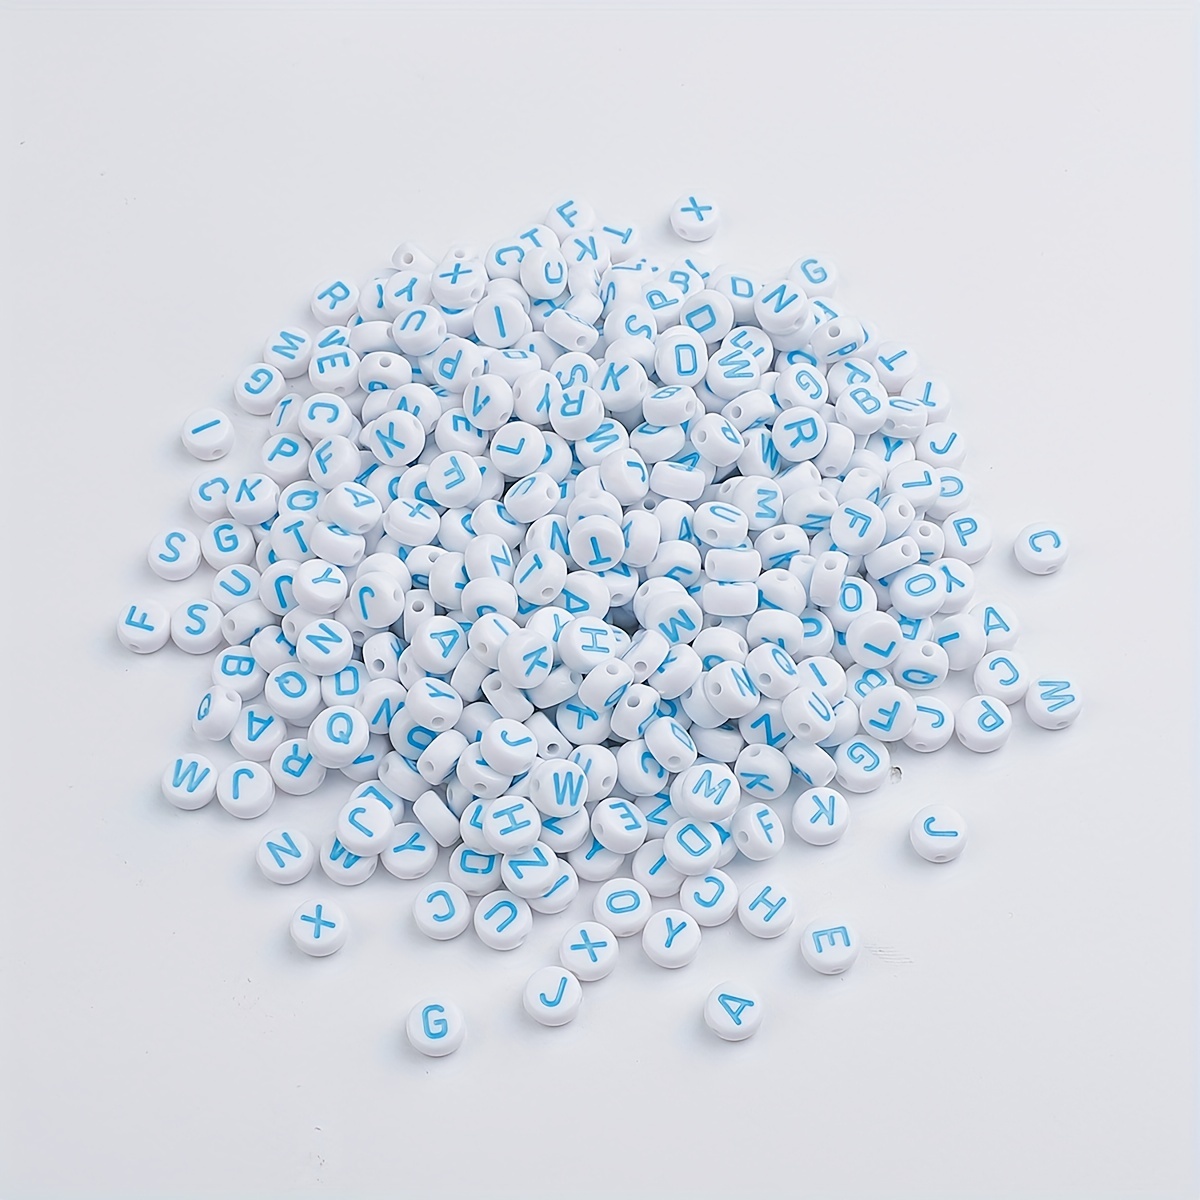 100pcs Acrylic Solid White And Blue Flat Letter Beads, Loose Spacer Beads  For Jewelry Making DIY Beaded Bracelets Necklaces Craft Supplies